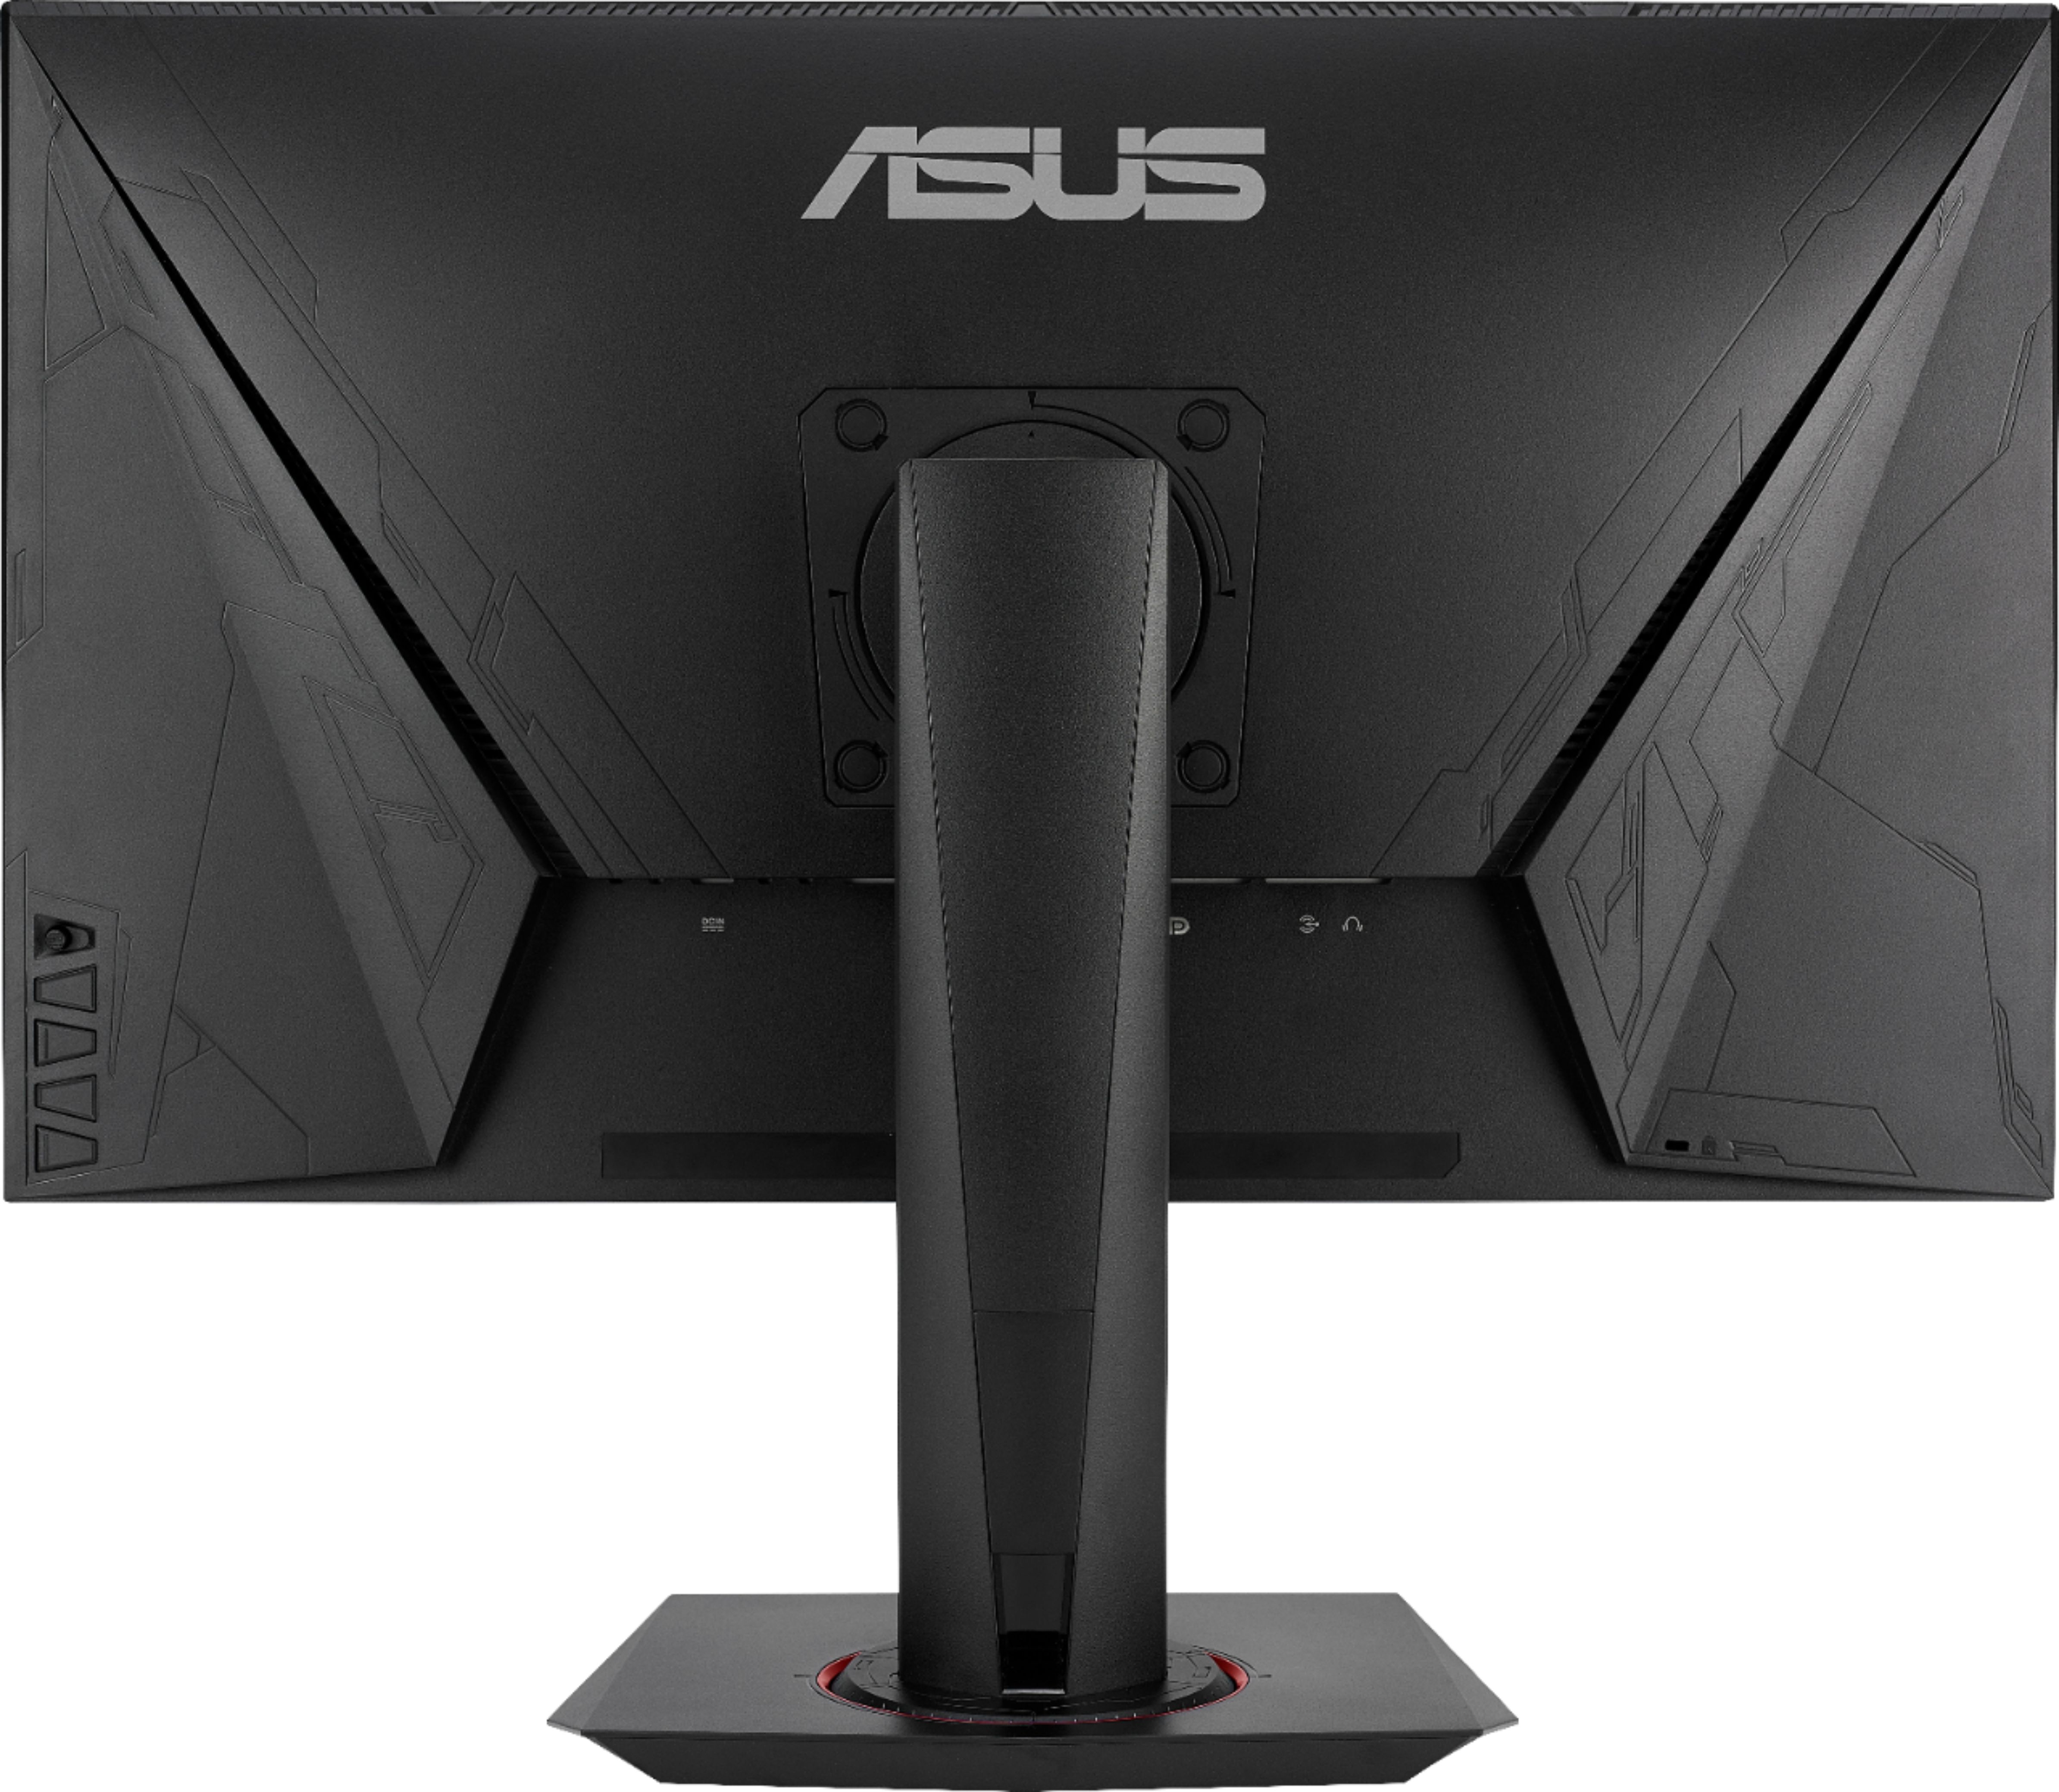 Back View: ASUS - Geek Squad Certified Refurbished VG279Q 27" IPS LED FHD FreeSync Monitor - Black